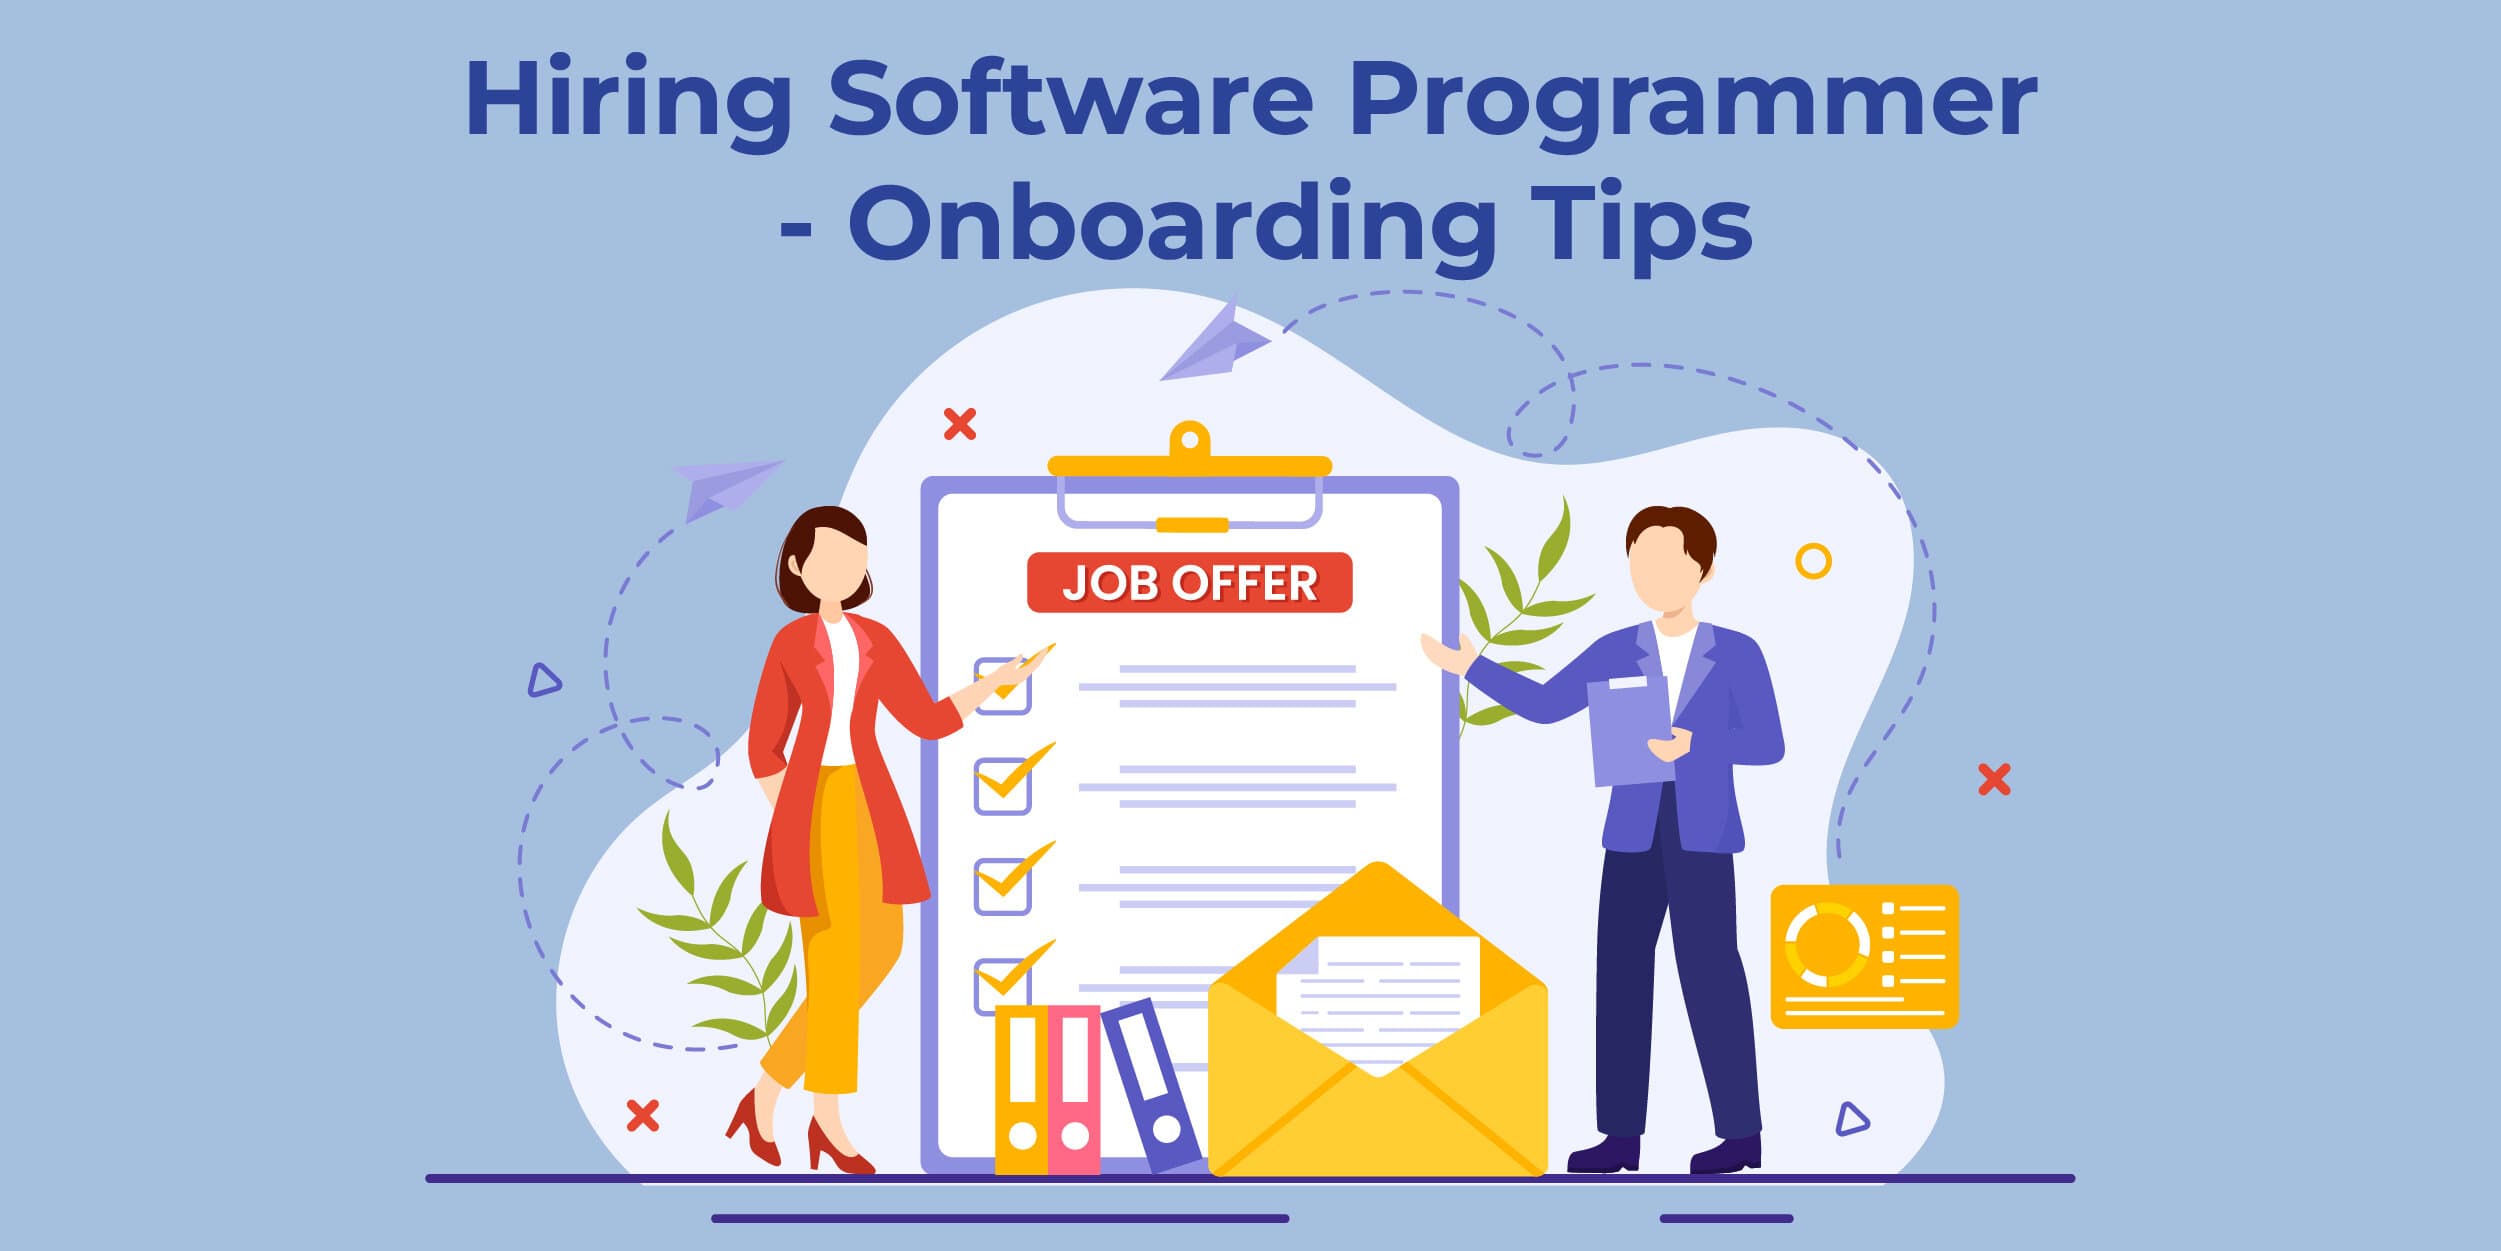 Top Employee Onboarding Tips When You Hire Software Programmers